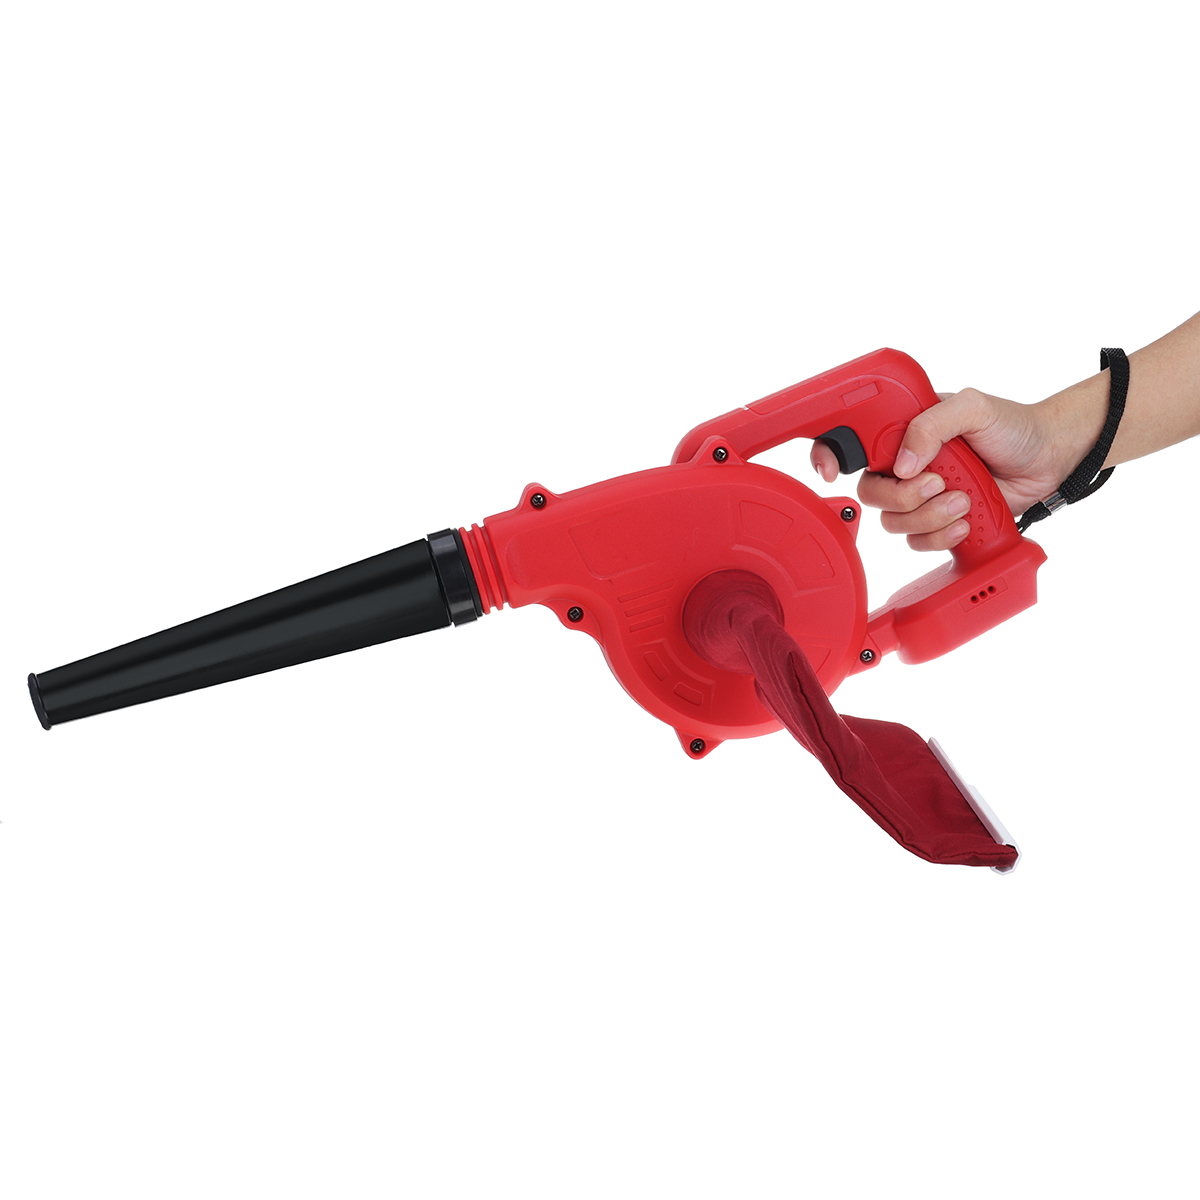 18V-Cordless-Rechargable-Electric-Air-Blower-Vacuum-Cleaner-Suction-Blower-Tool-For-Makita-18V-Li-io-1632470-6